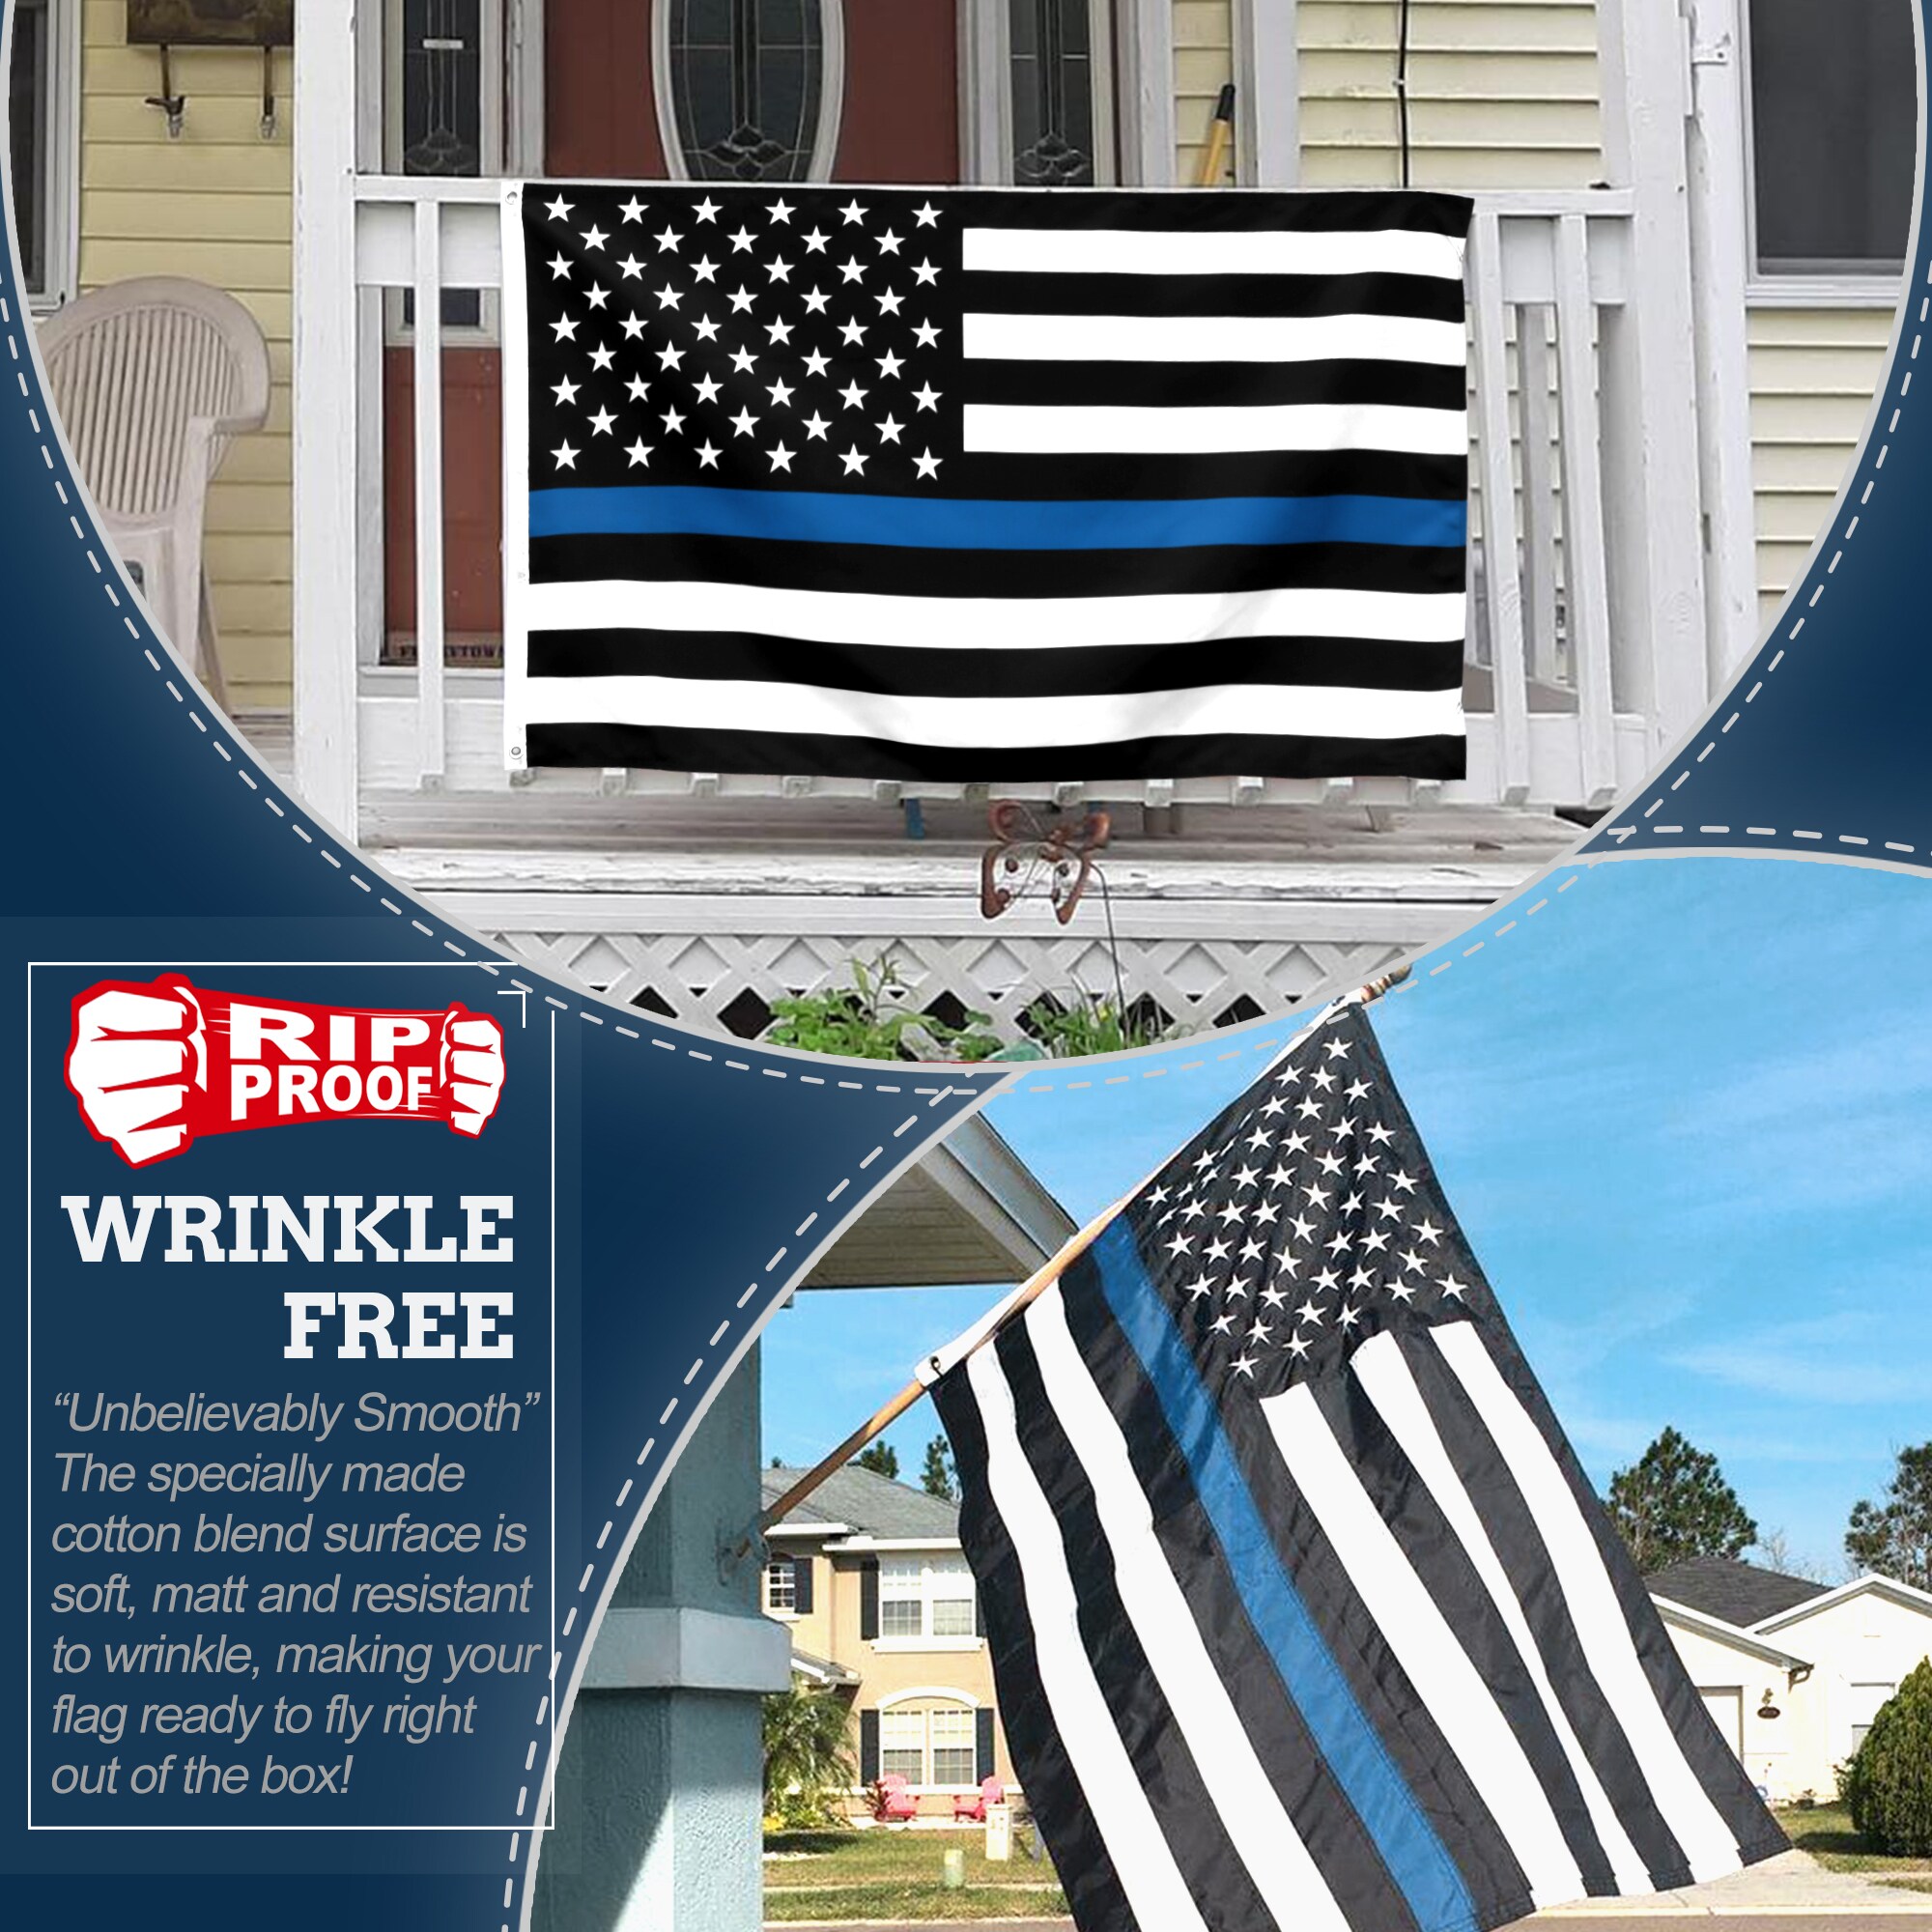 Anley Rip-Proof Technology 3-Ply Thin Blue Line 5-ft W x 3-ft H Flag in ...